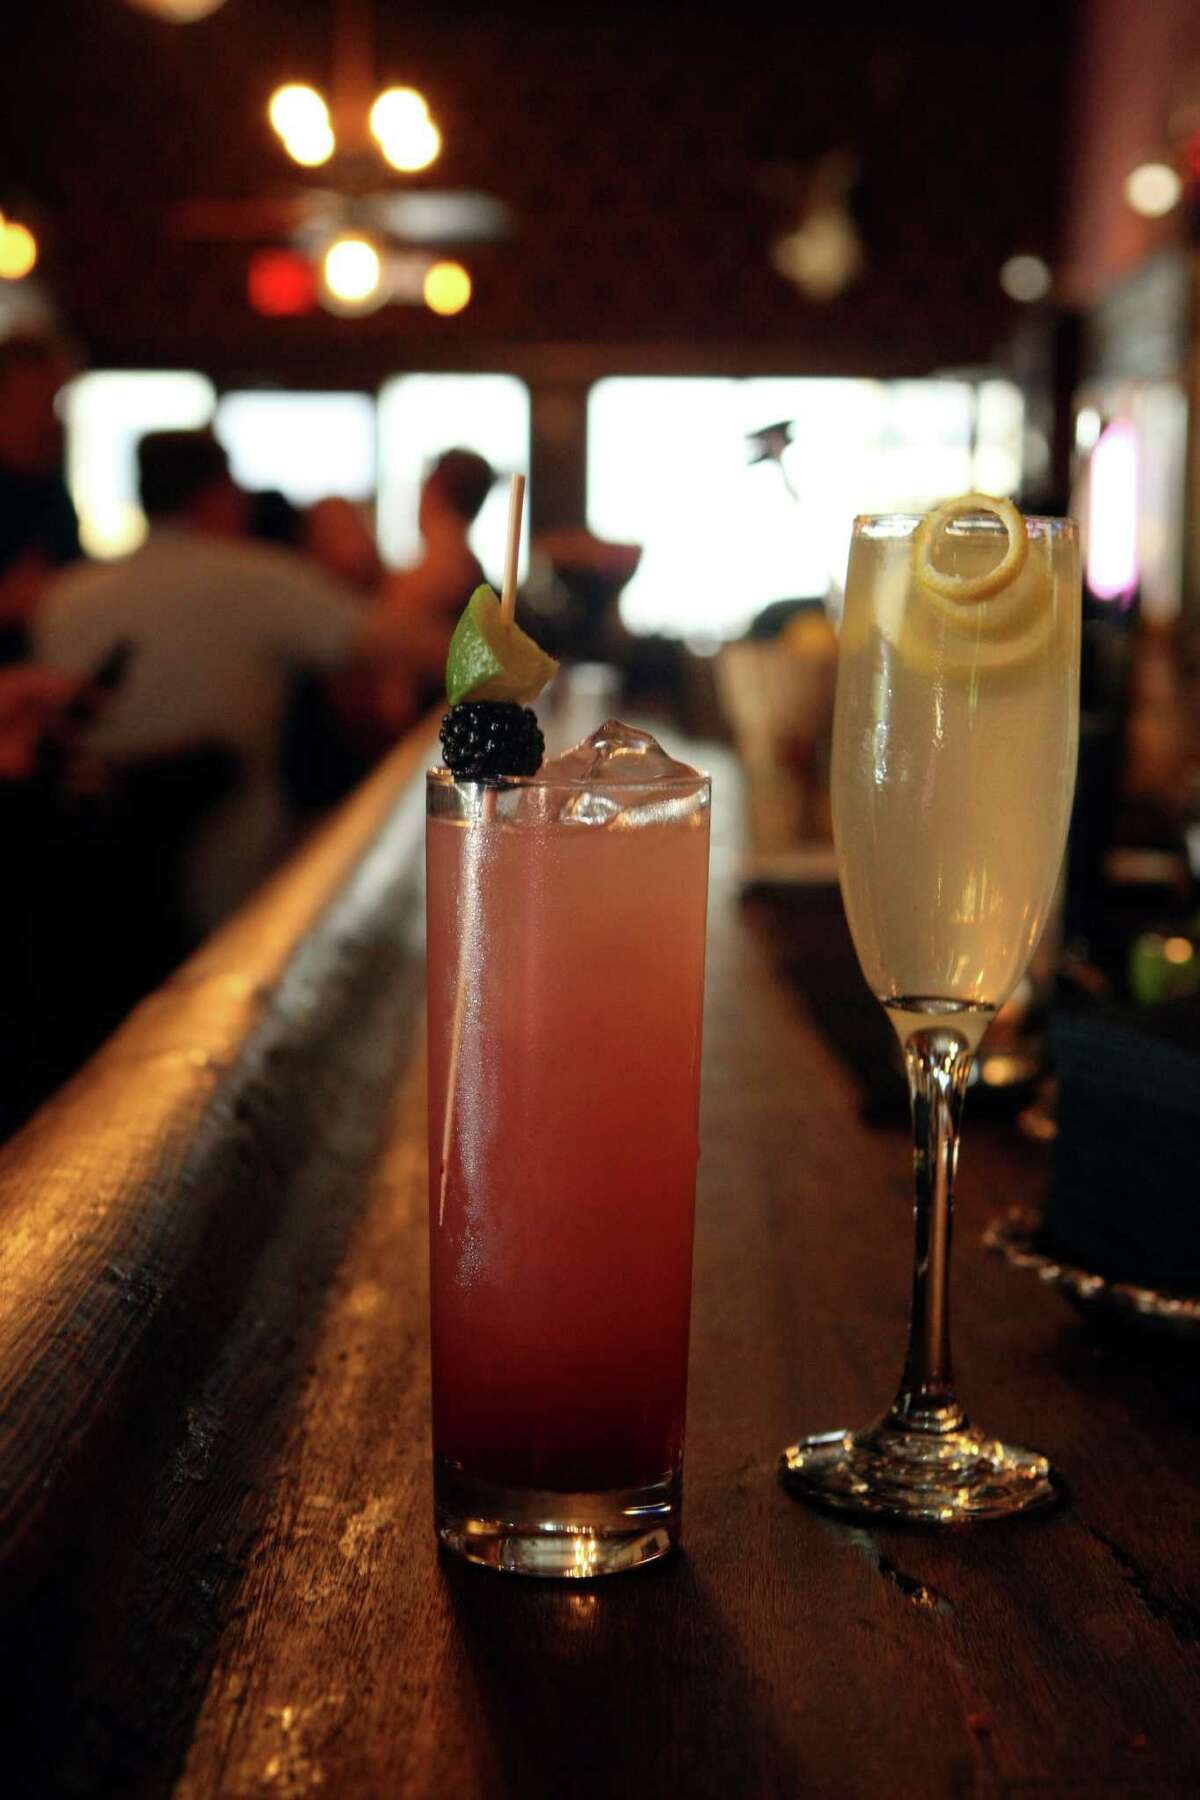 The Esquire Tavern was named the Critics’ Choice and Readers’ Choice (tie) for best place for a cocktail.